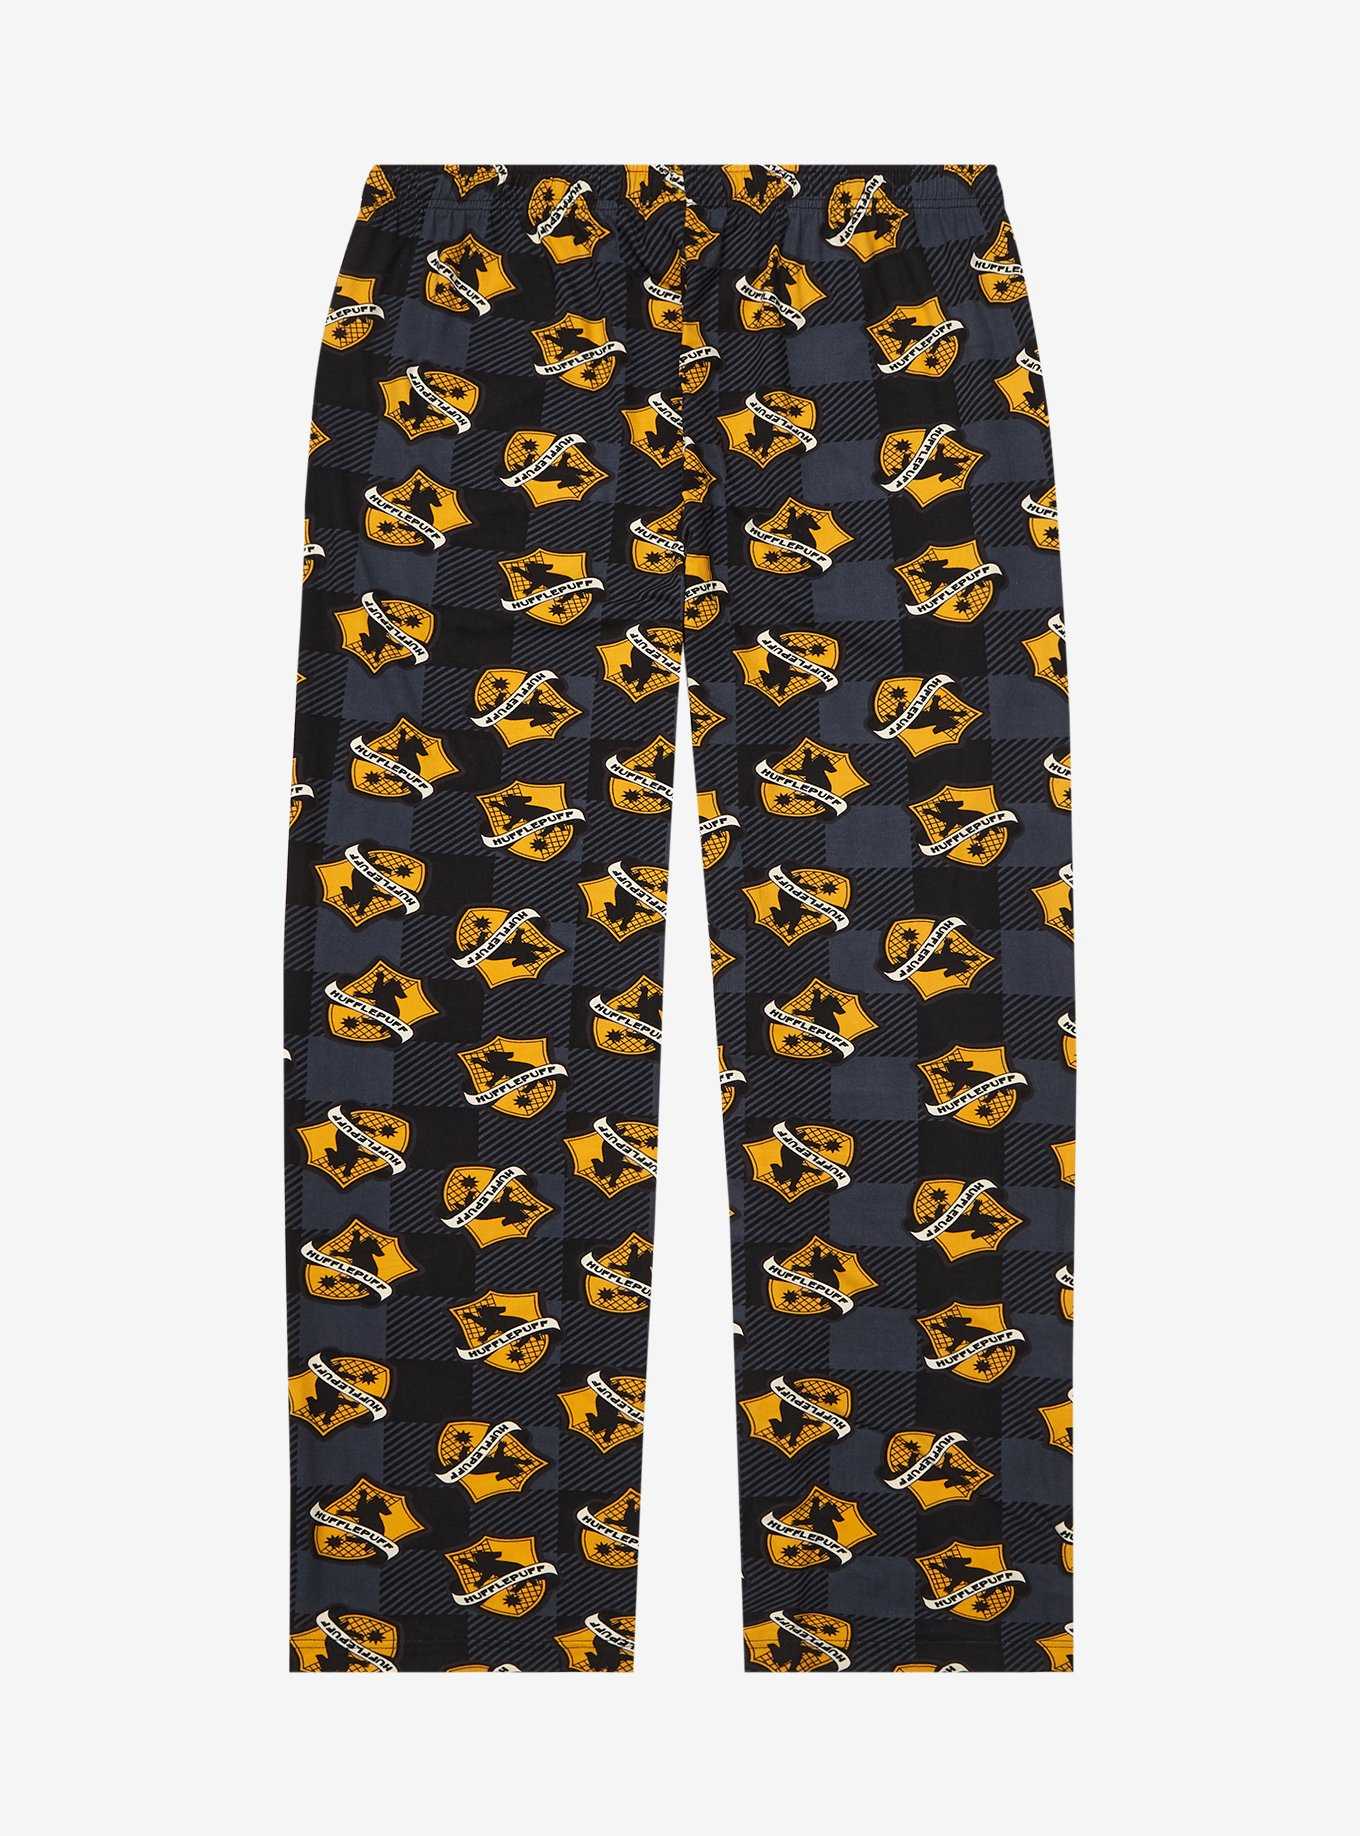 Harry Potter Plaid Hufflepuff Allover Print Plus Size Sleep Pants - BoxLunch Exclusive, , hi-res